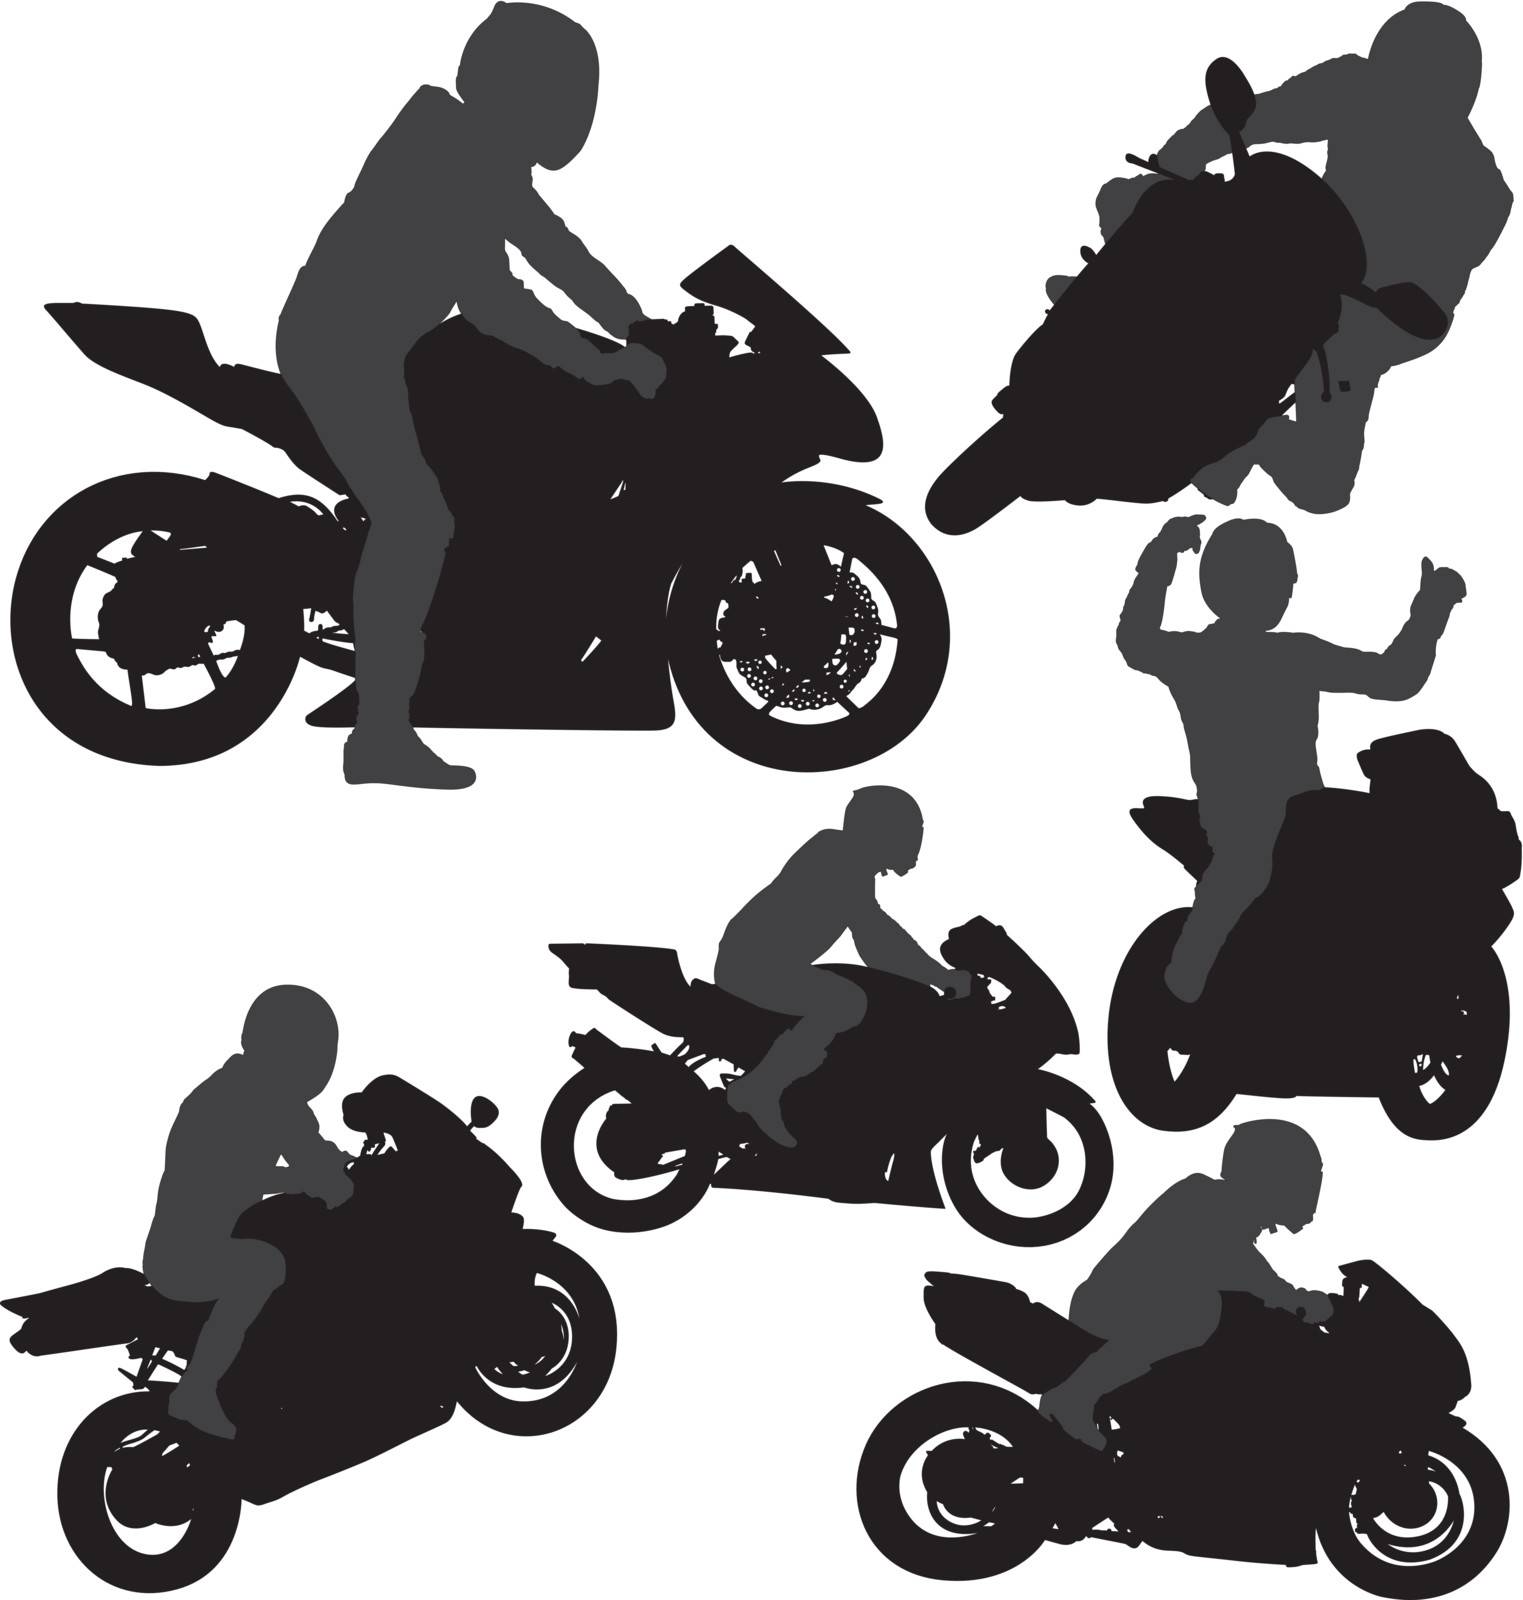 Motorcycle rider silhouettes by only4denn